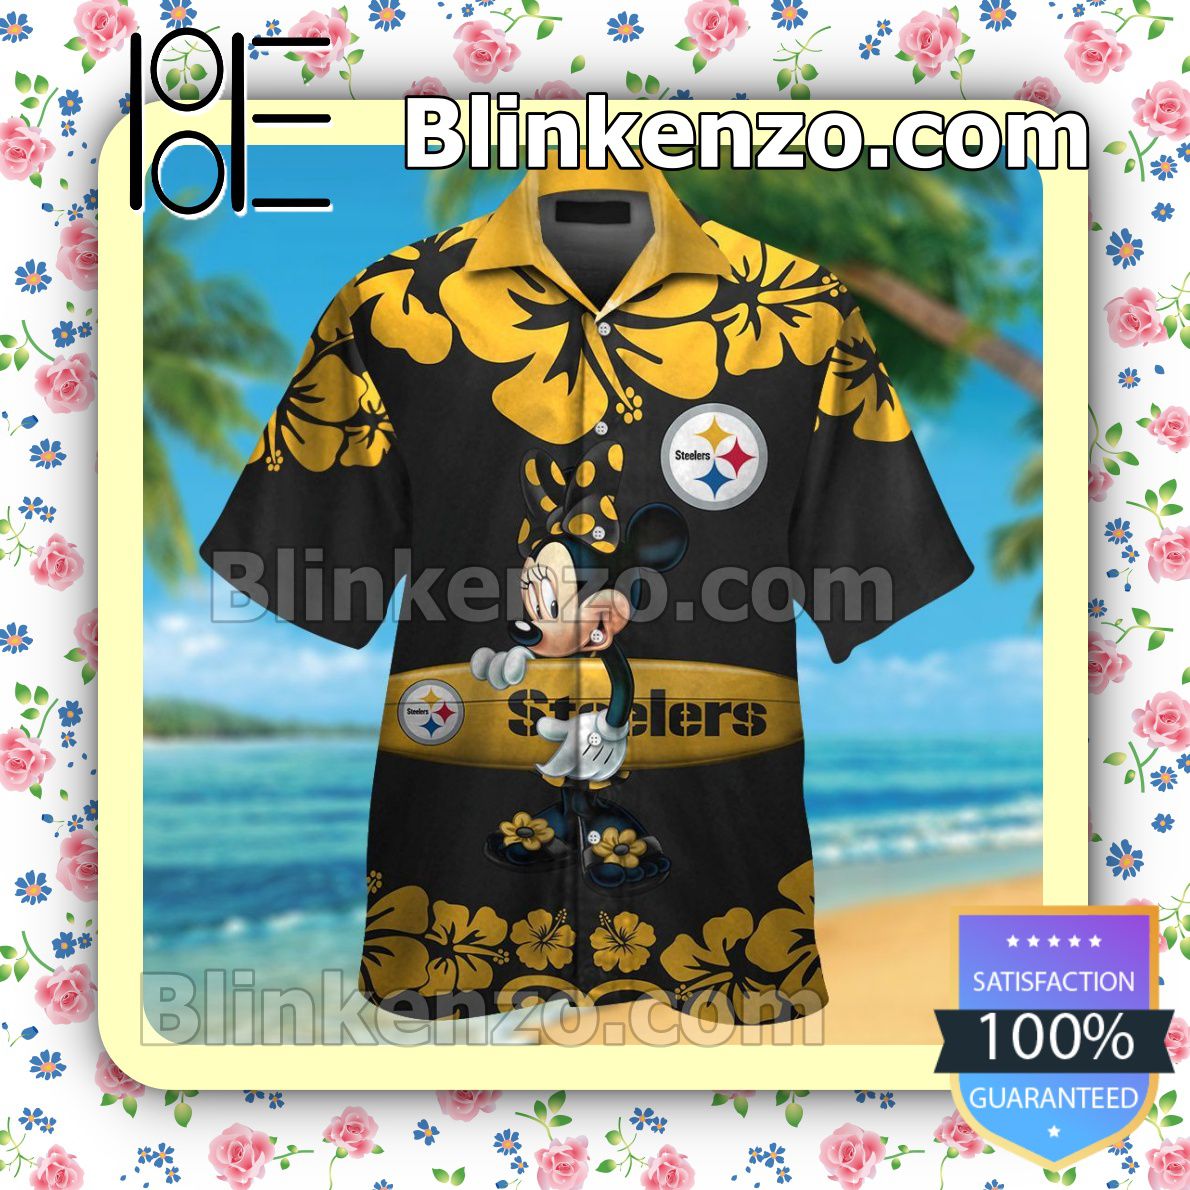 Pittsburgh Steelers & Minnie Mouse Mens Shirt, Swim Trunk